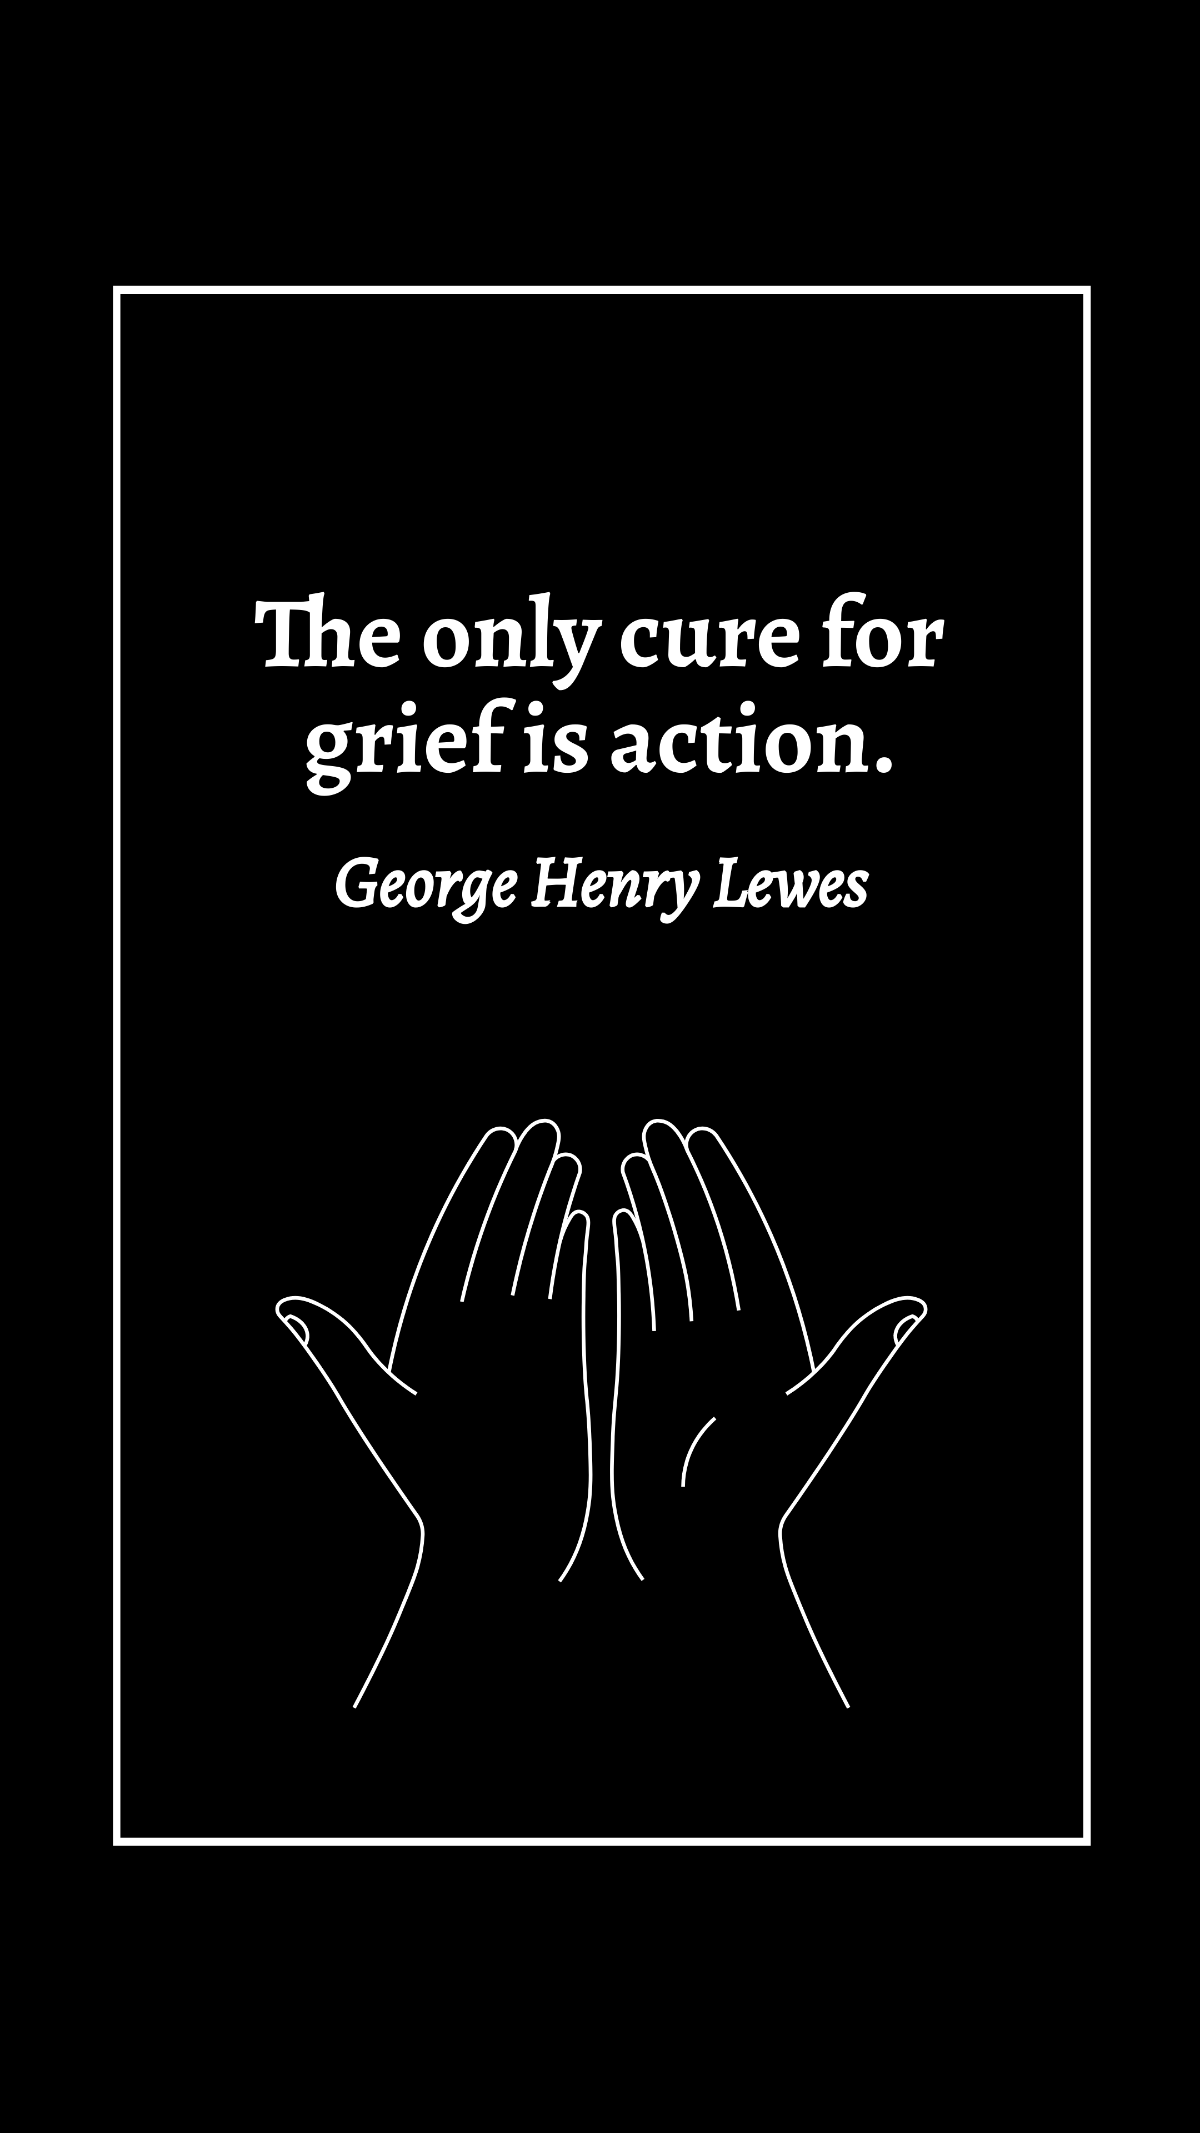 George Henry Lewes - The only cure for grief is action. Template